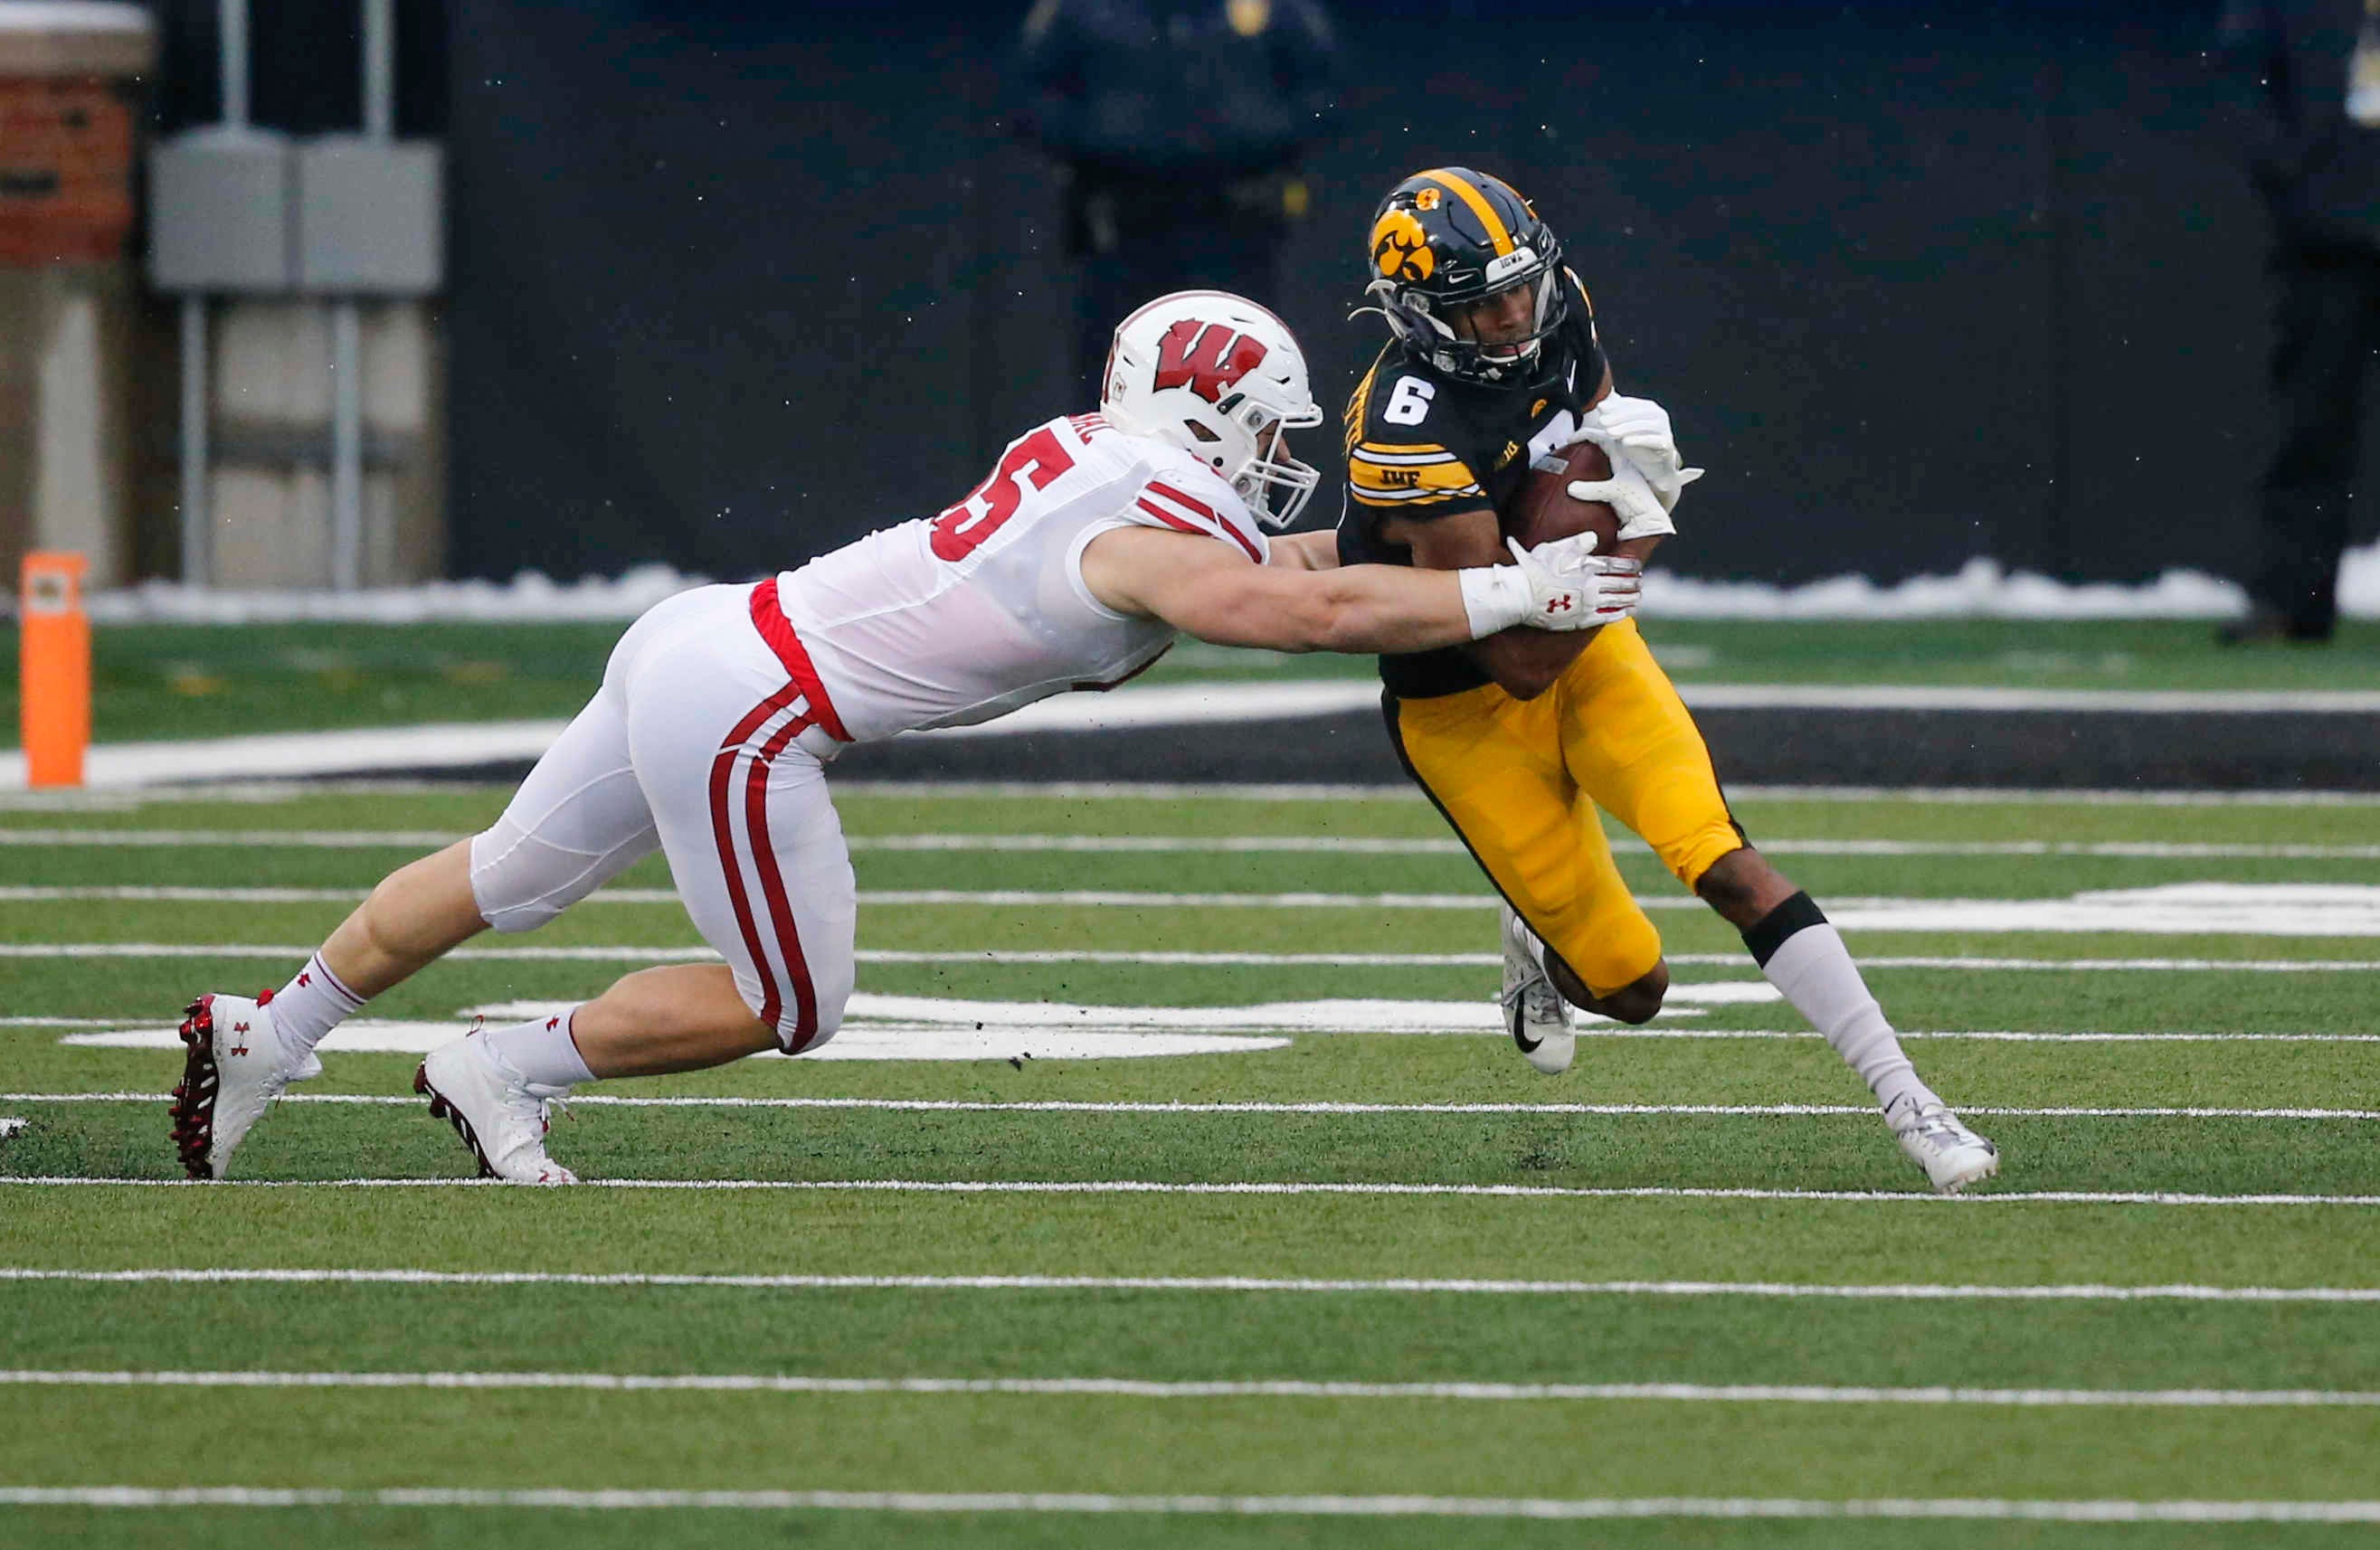 Iowa senior receiver Ihmir Smith-Marsette carries the ball for a first down in the first quarter against Wisconsin on Saturday, Dec. 12, 2020, at Kinnick Stadium in Iowa City, Iowa.